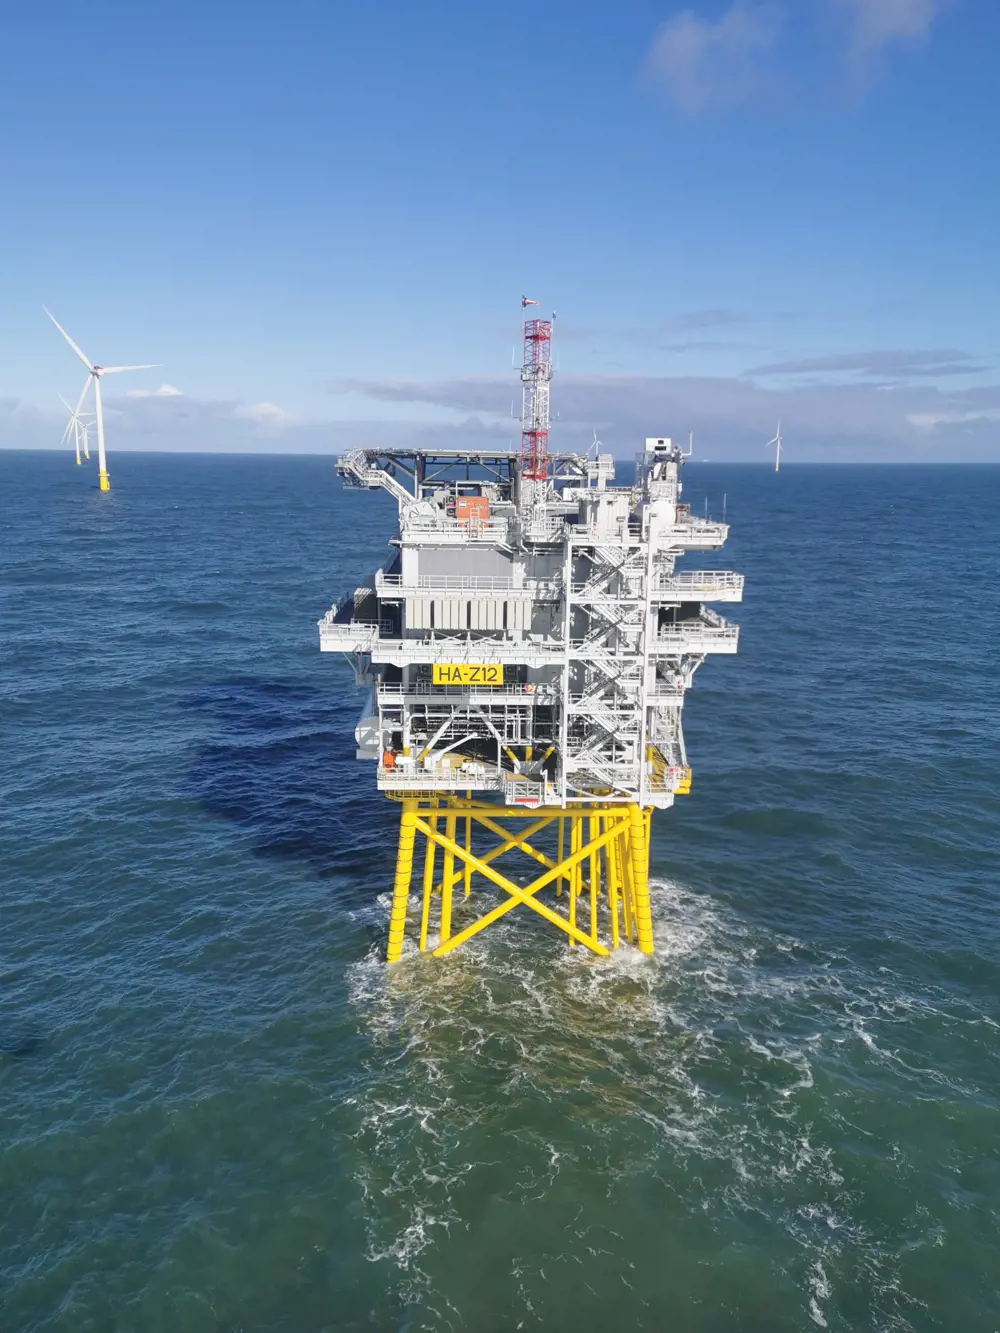 A reactive compensation station in the ocean with wind turbines in the background.